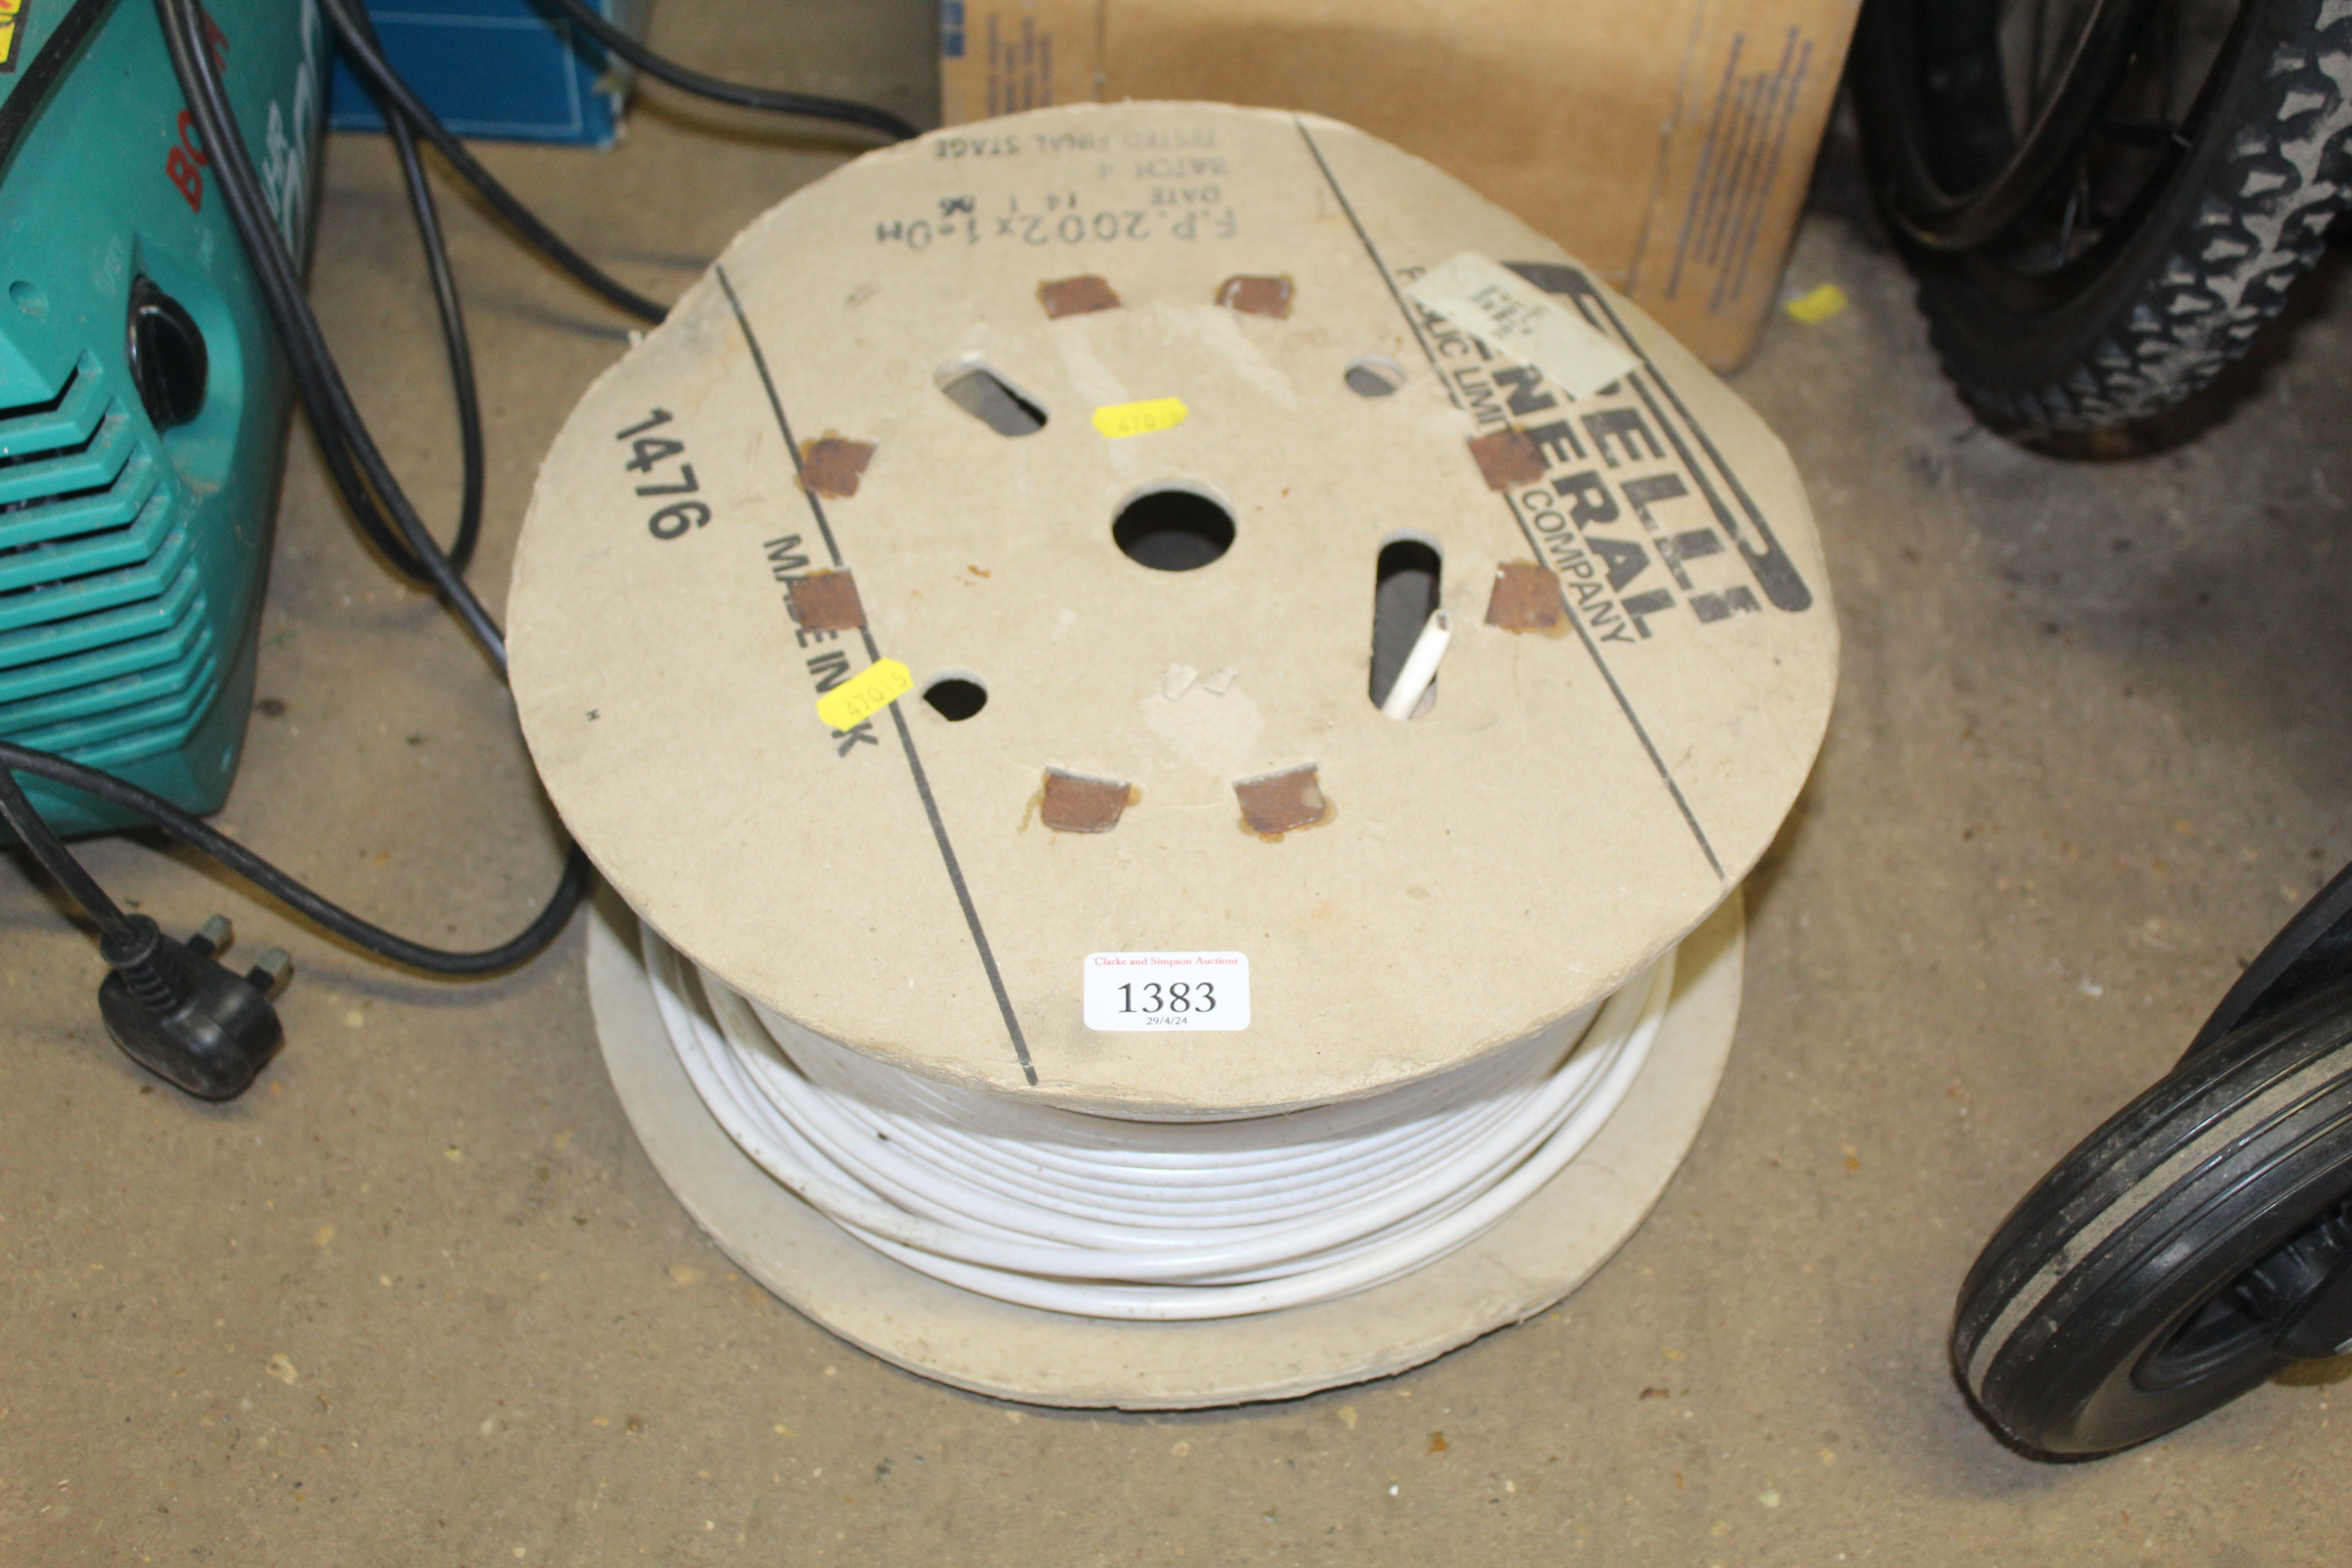 A spool of two core electric cabling